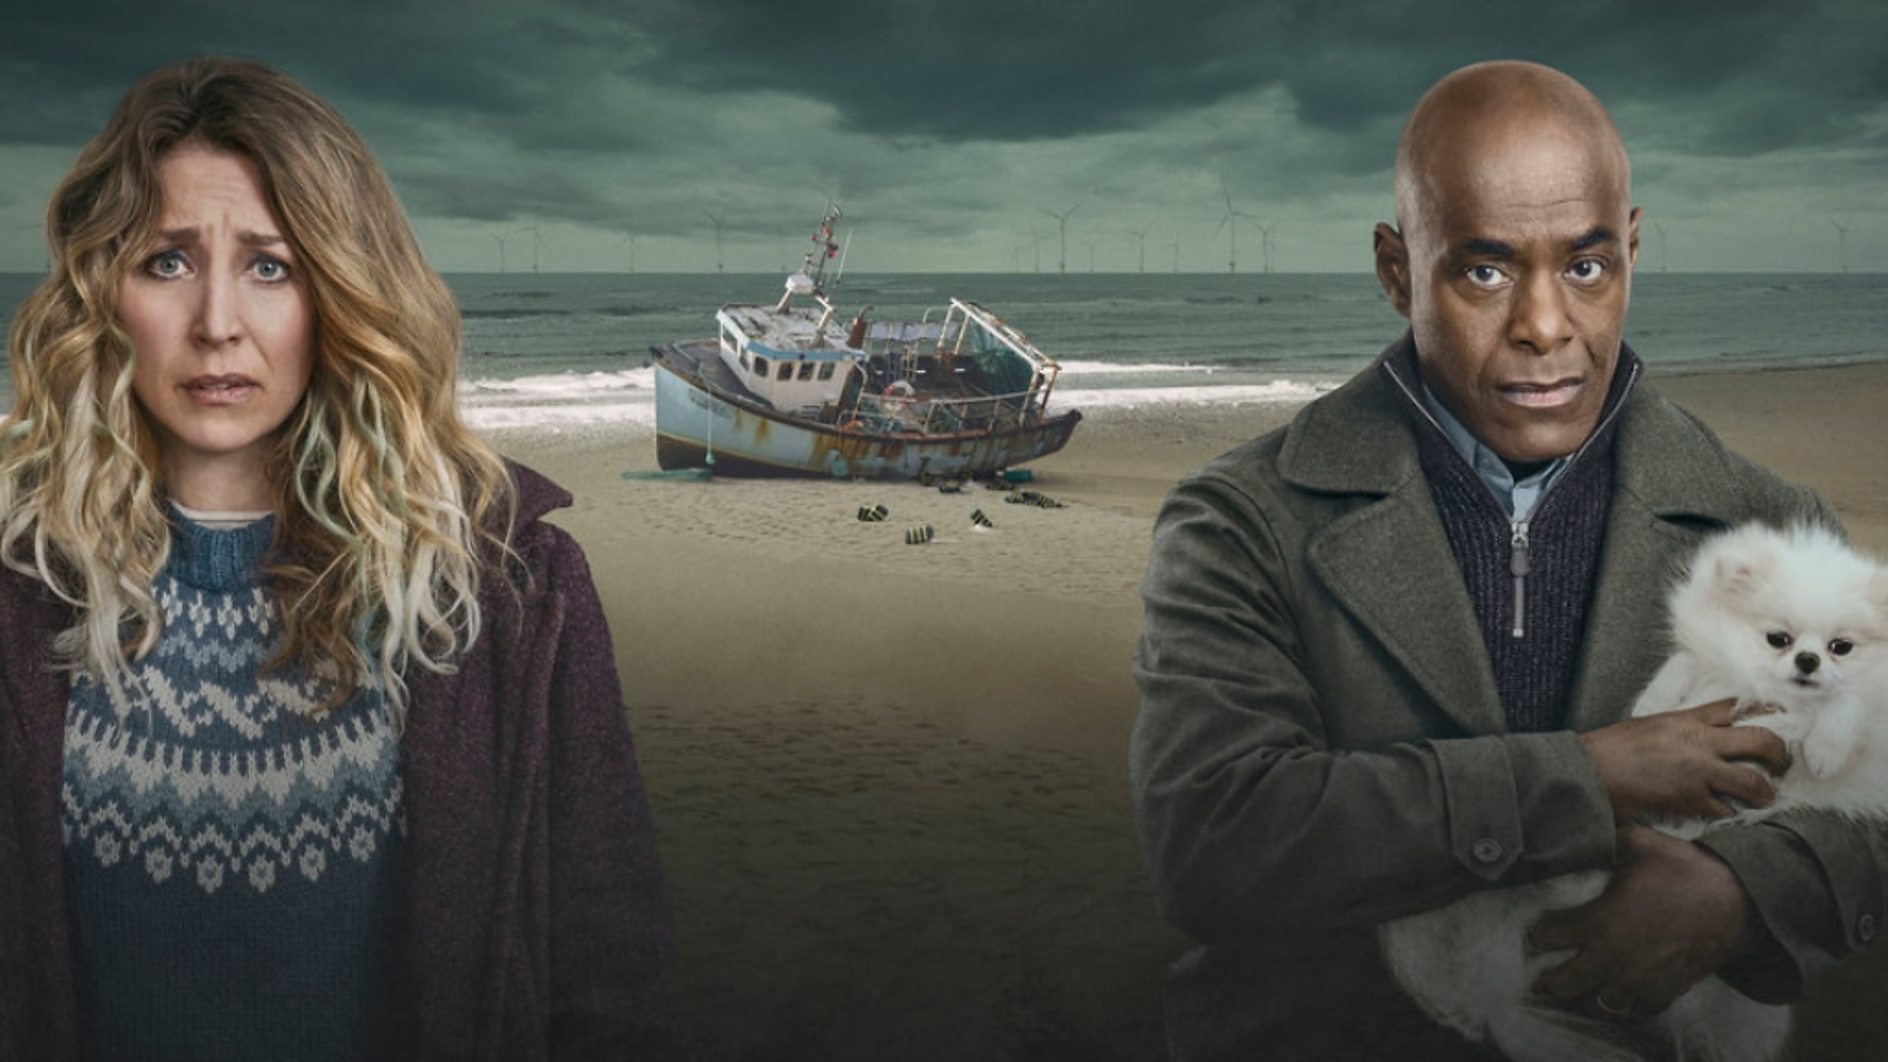 Boat Story - the BBC One action-thriller that's "so weird, in a brilliant way"